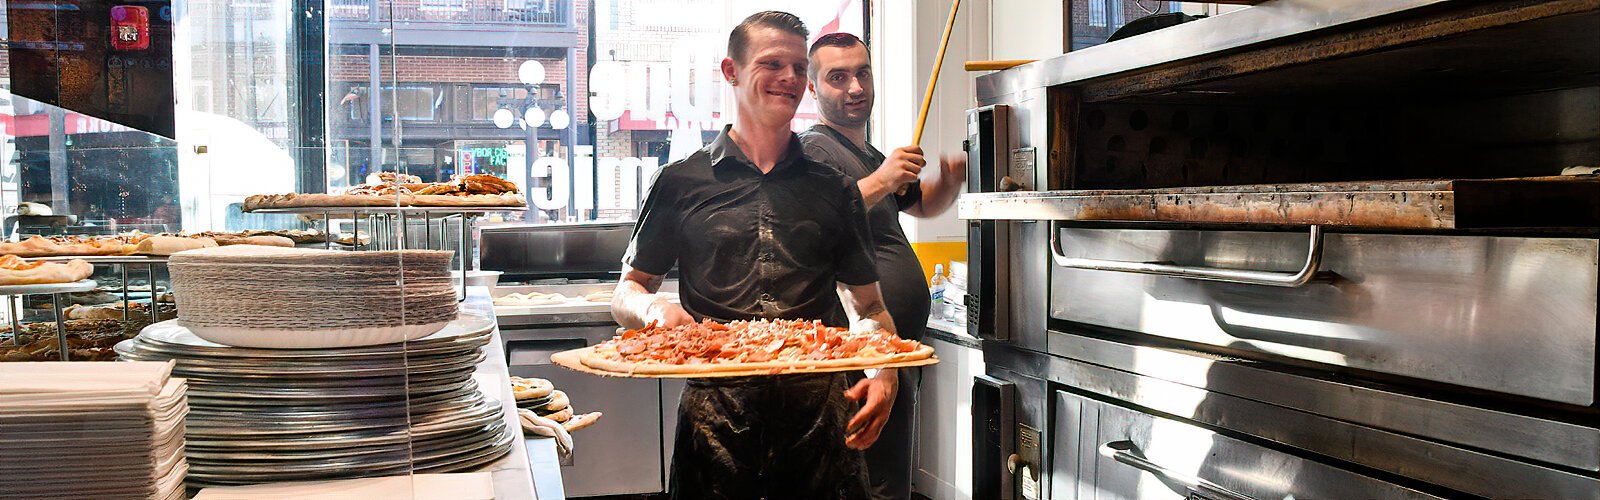 Made in-house, hand-spun and topped with the freshest ingredients, a mouth-watering pizza is brought to the oven at Due Amici pizza and pasta bar in Ybor.